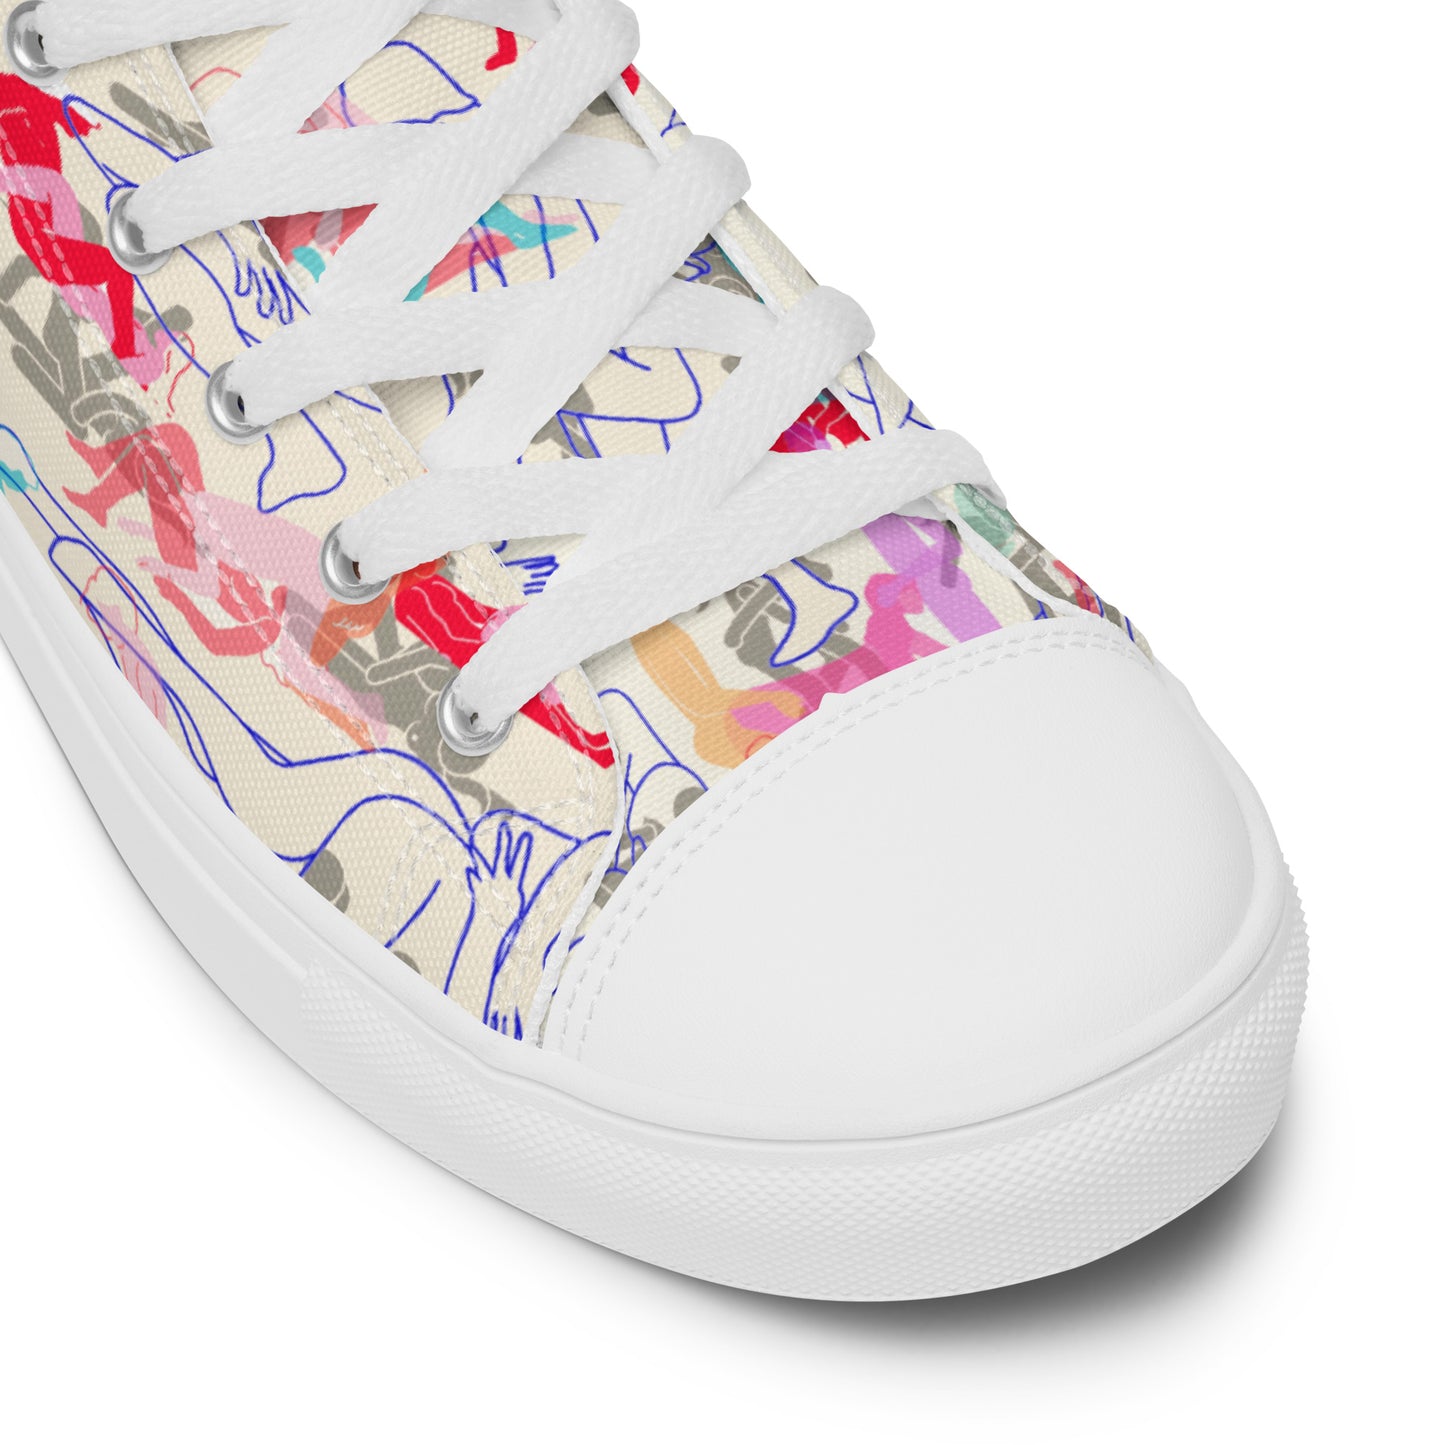 BISEXUAL ORGY Women’s high top canvas shoes